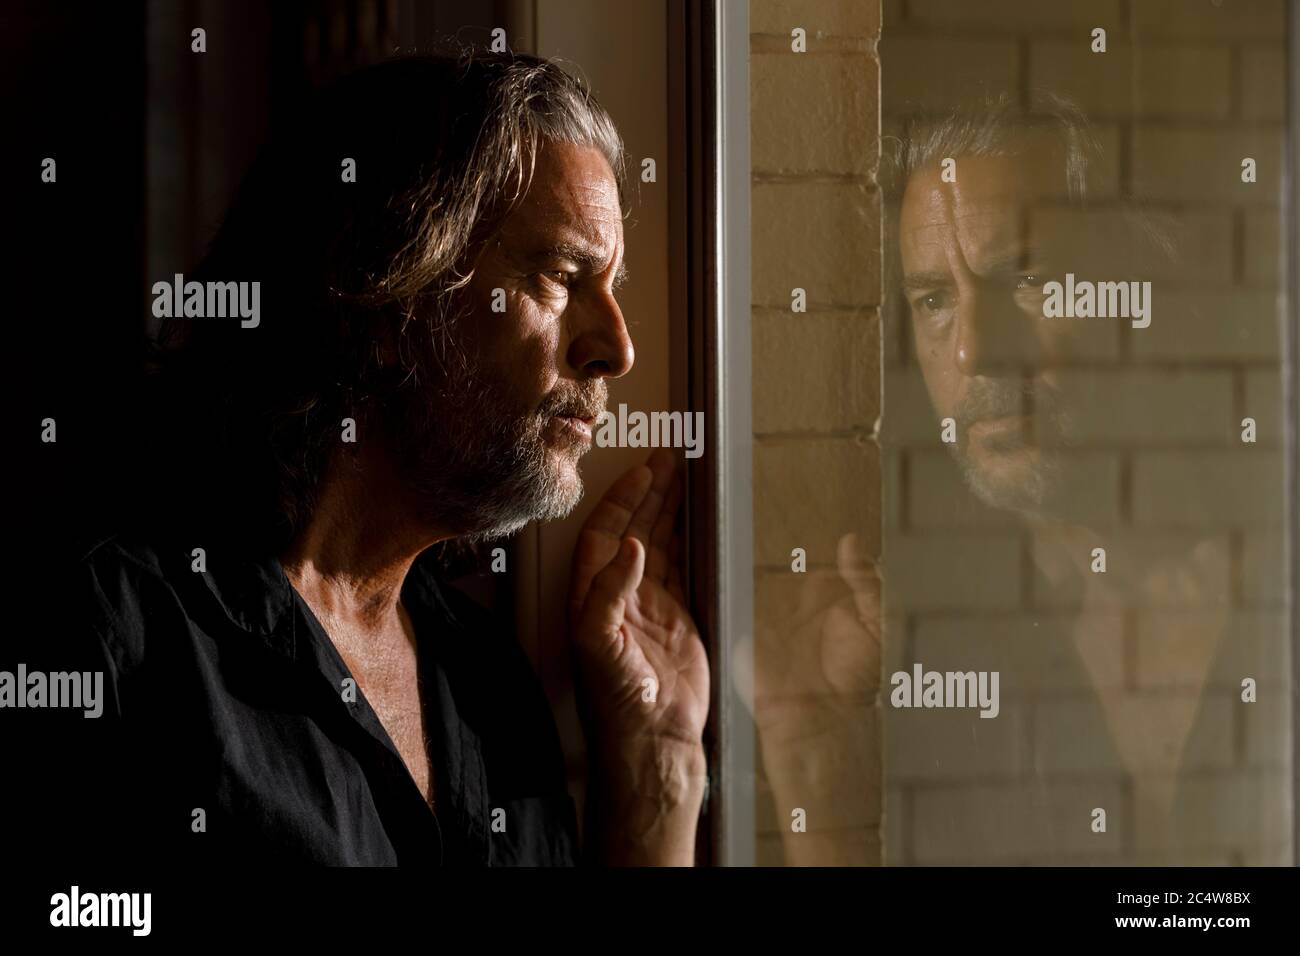 man in self isolation, stay home concept, thinking man's reflection in glass window of brick house, concerned long haired male with beard, home bound Stock Photo